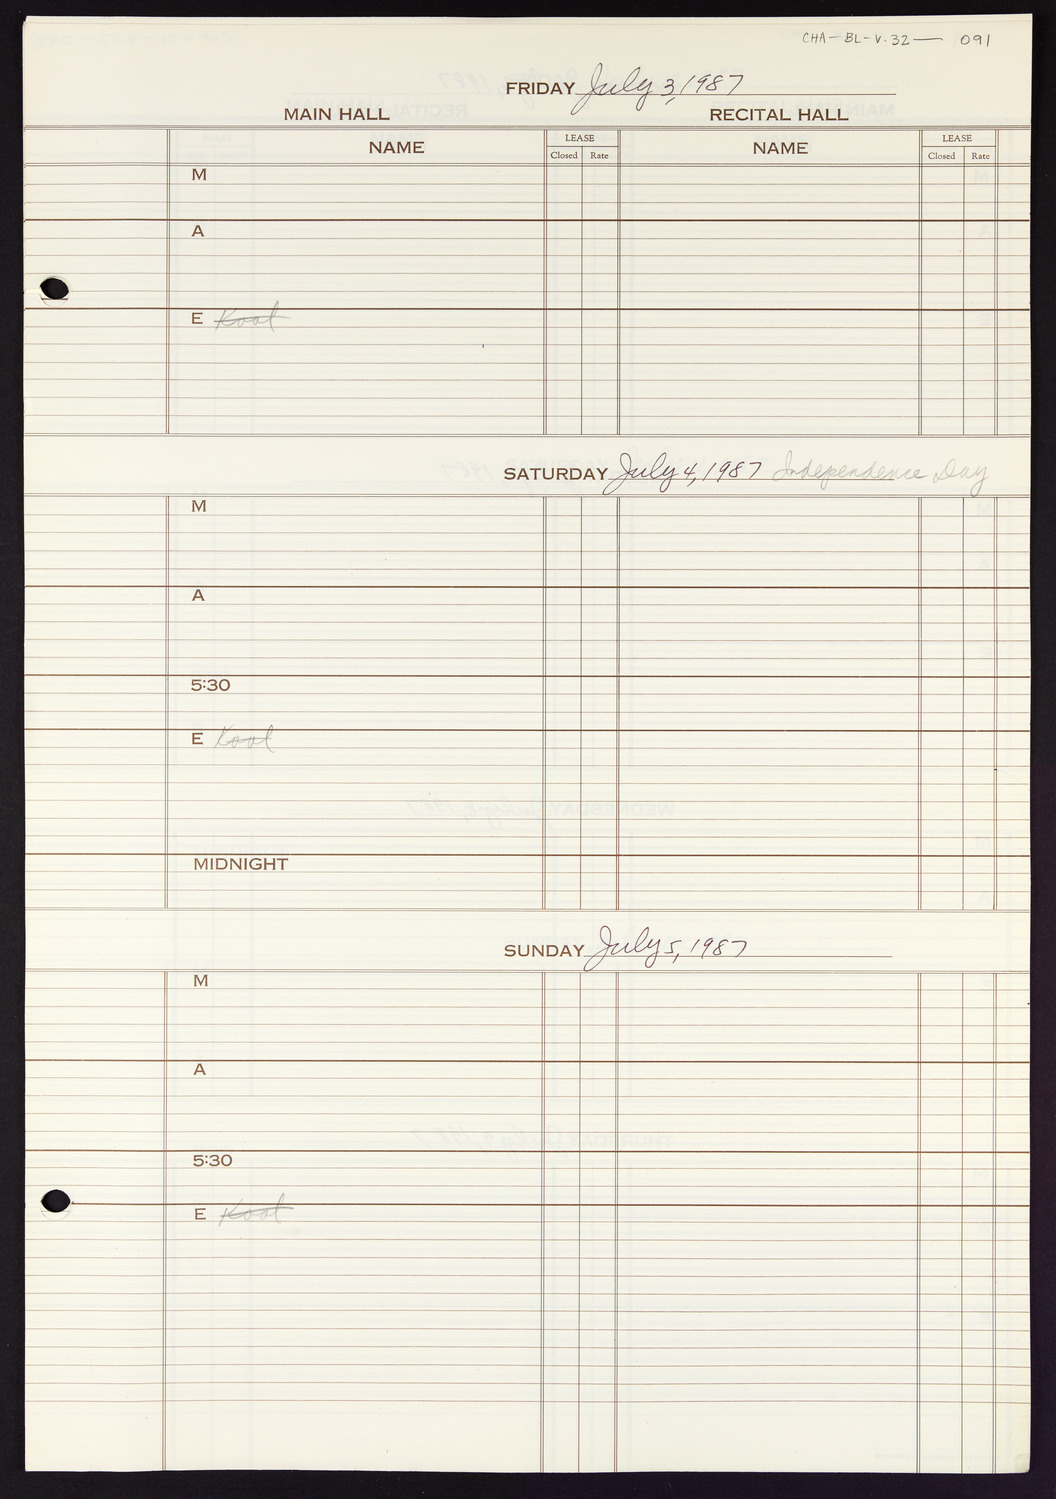 Carnegie Hall Booking Ledger, volume 32, page 91